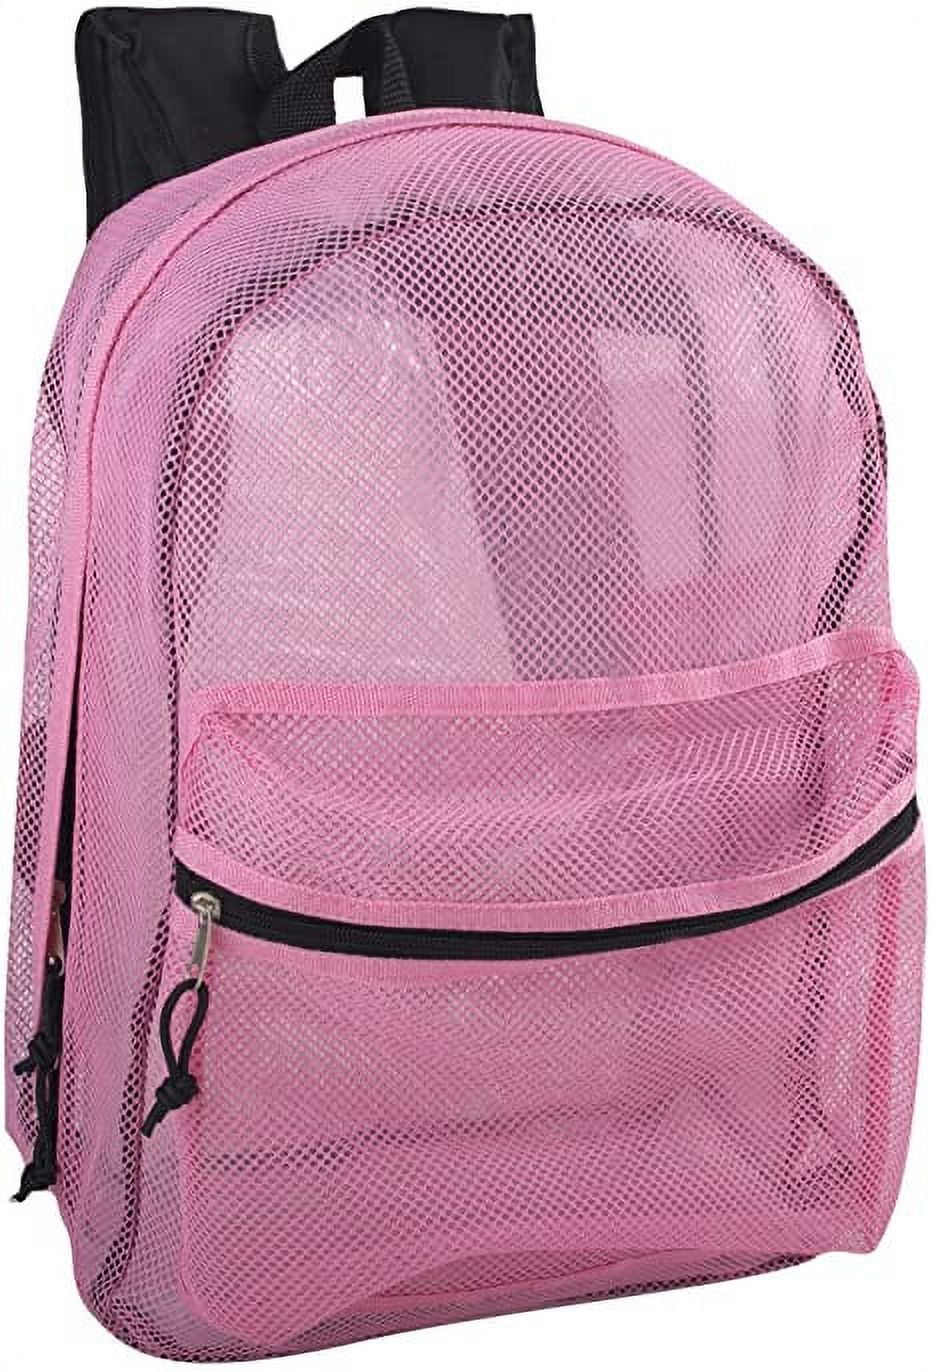 Cute pink school backpack with patches. Kids bag for school